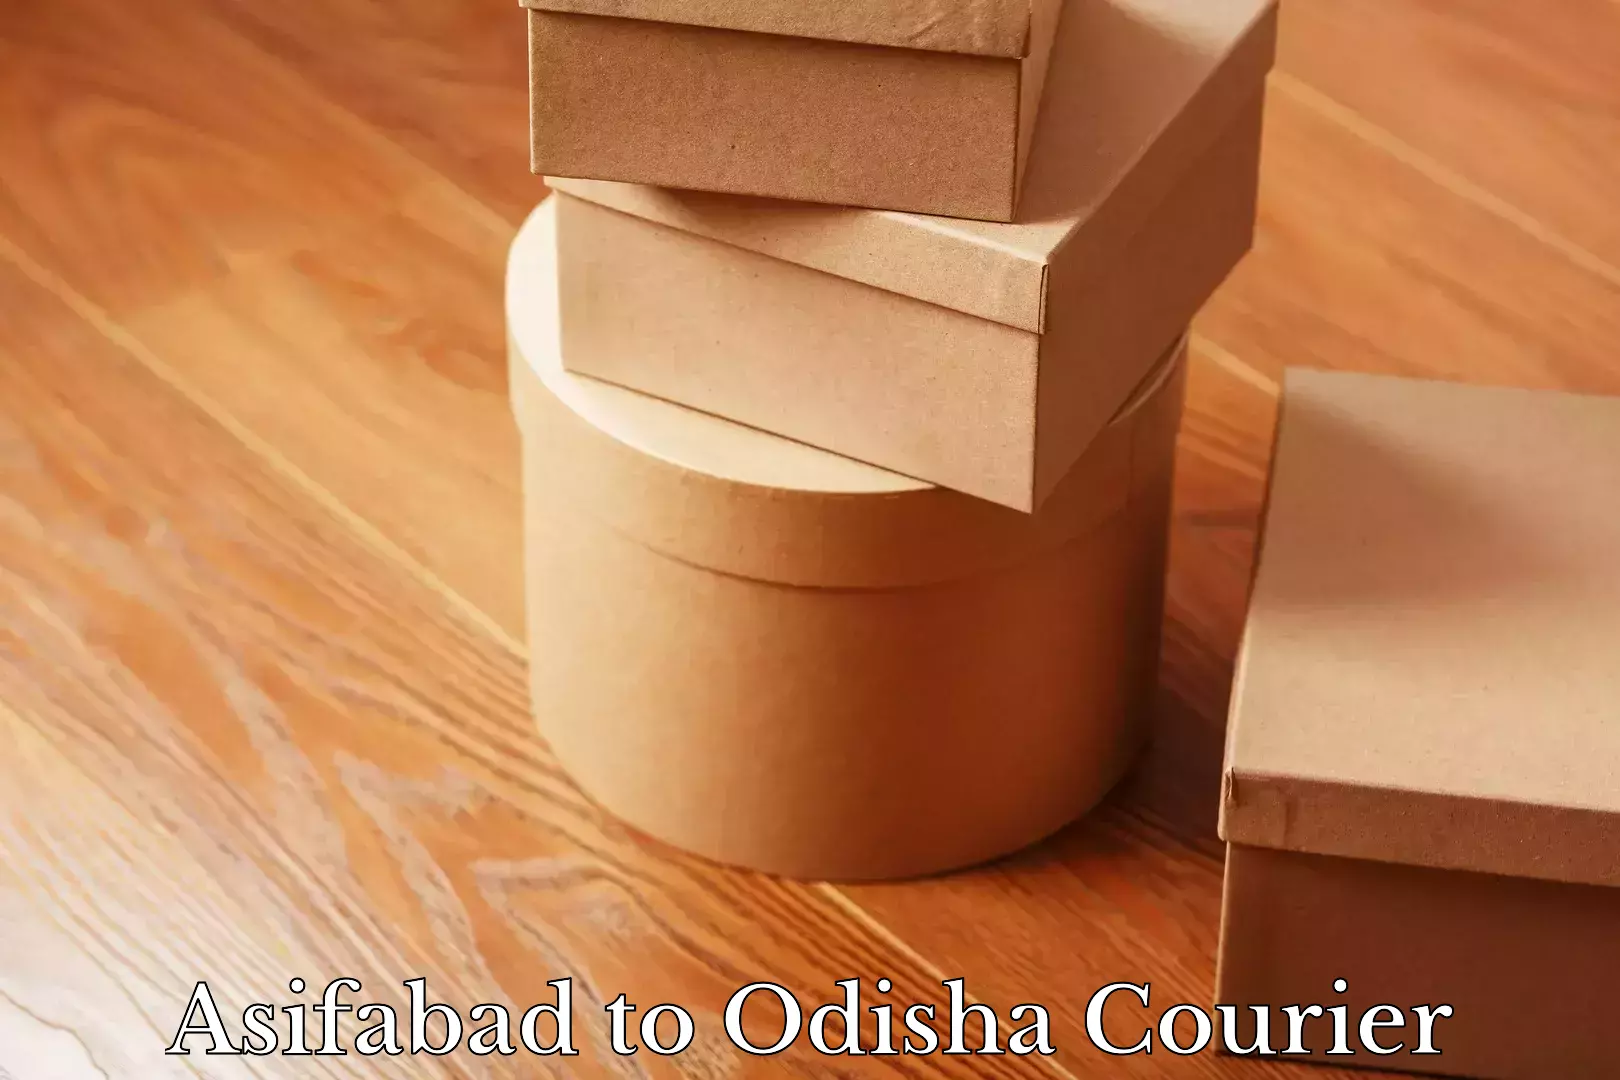 Courier service innovation Asifabad to Odisha